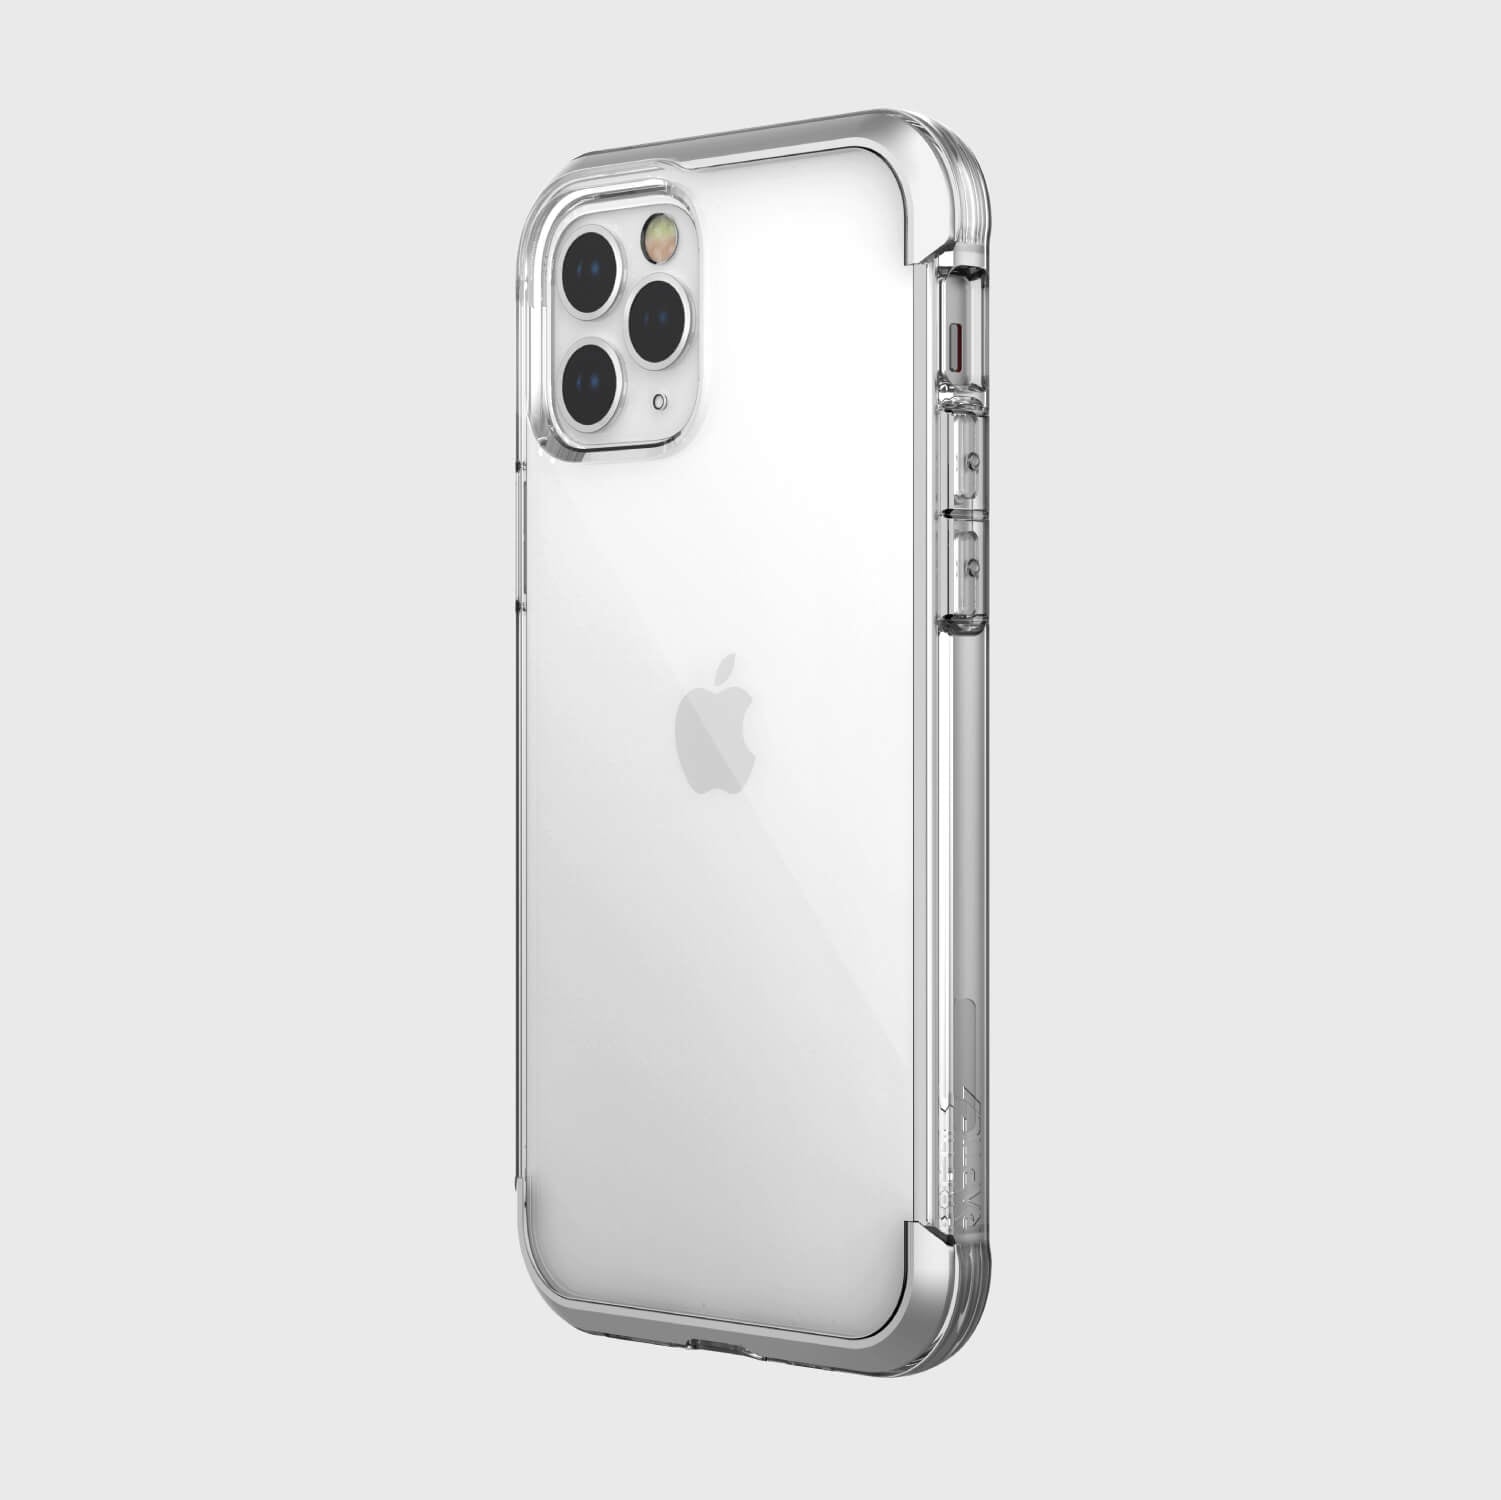 Showing a iPhone 12 Pro in a clear Raptic Air case